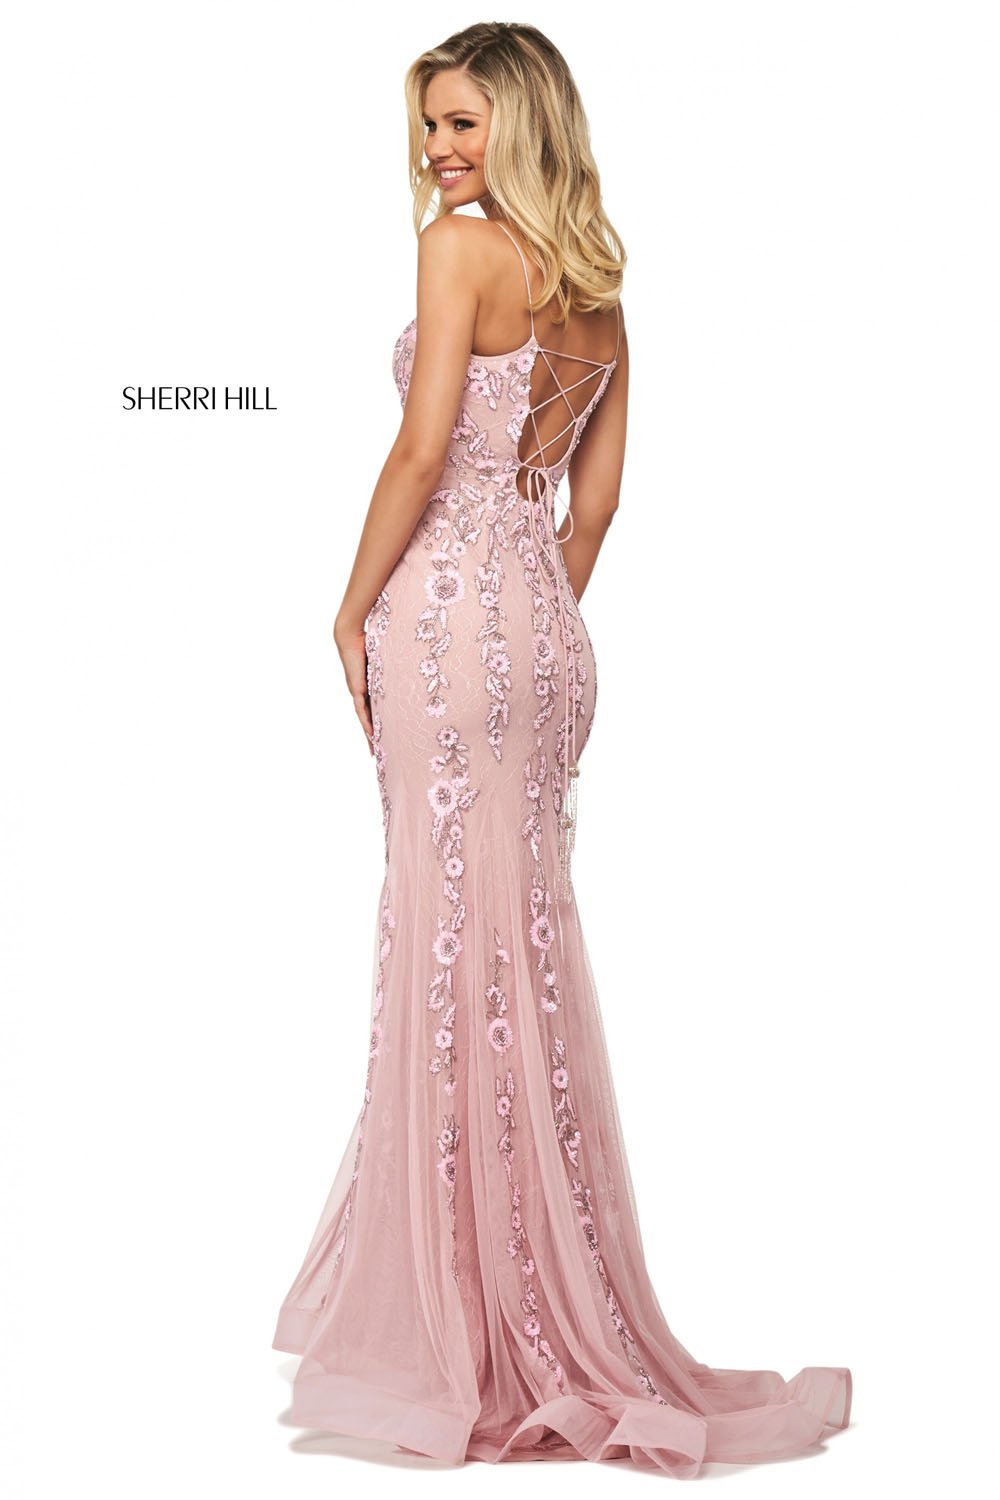 Sherri Hill 53780 dress images in these colors: Light Pink.